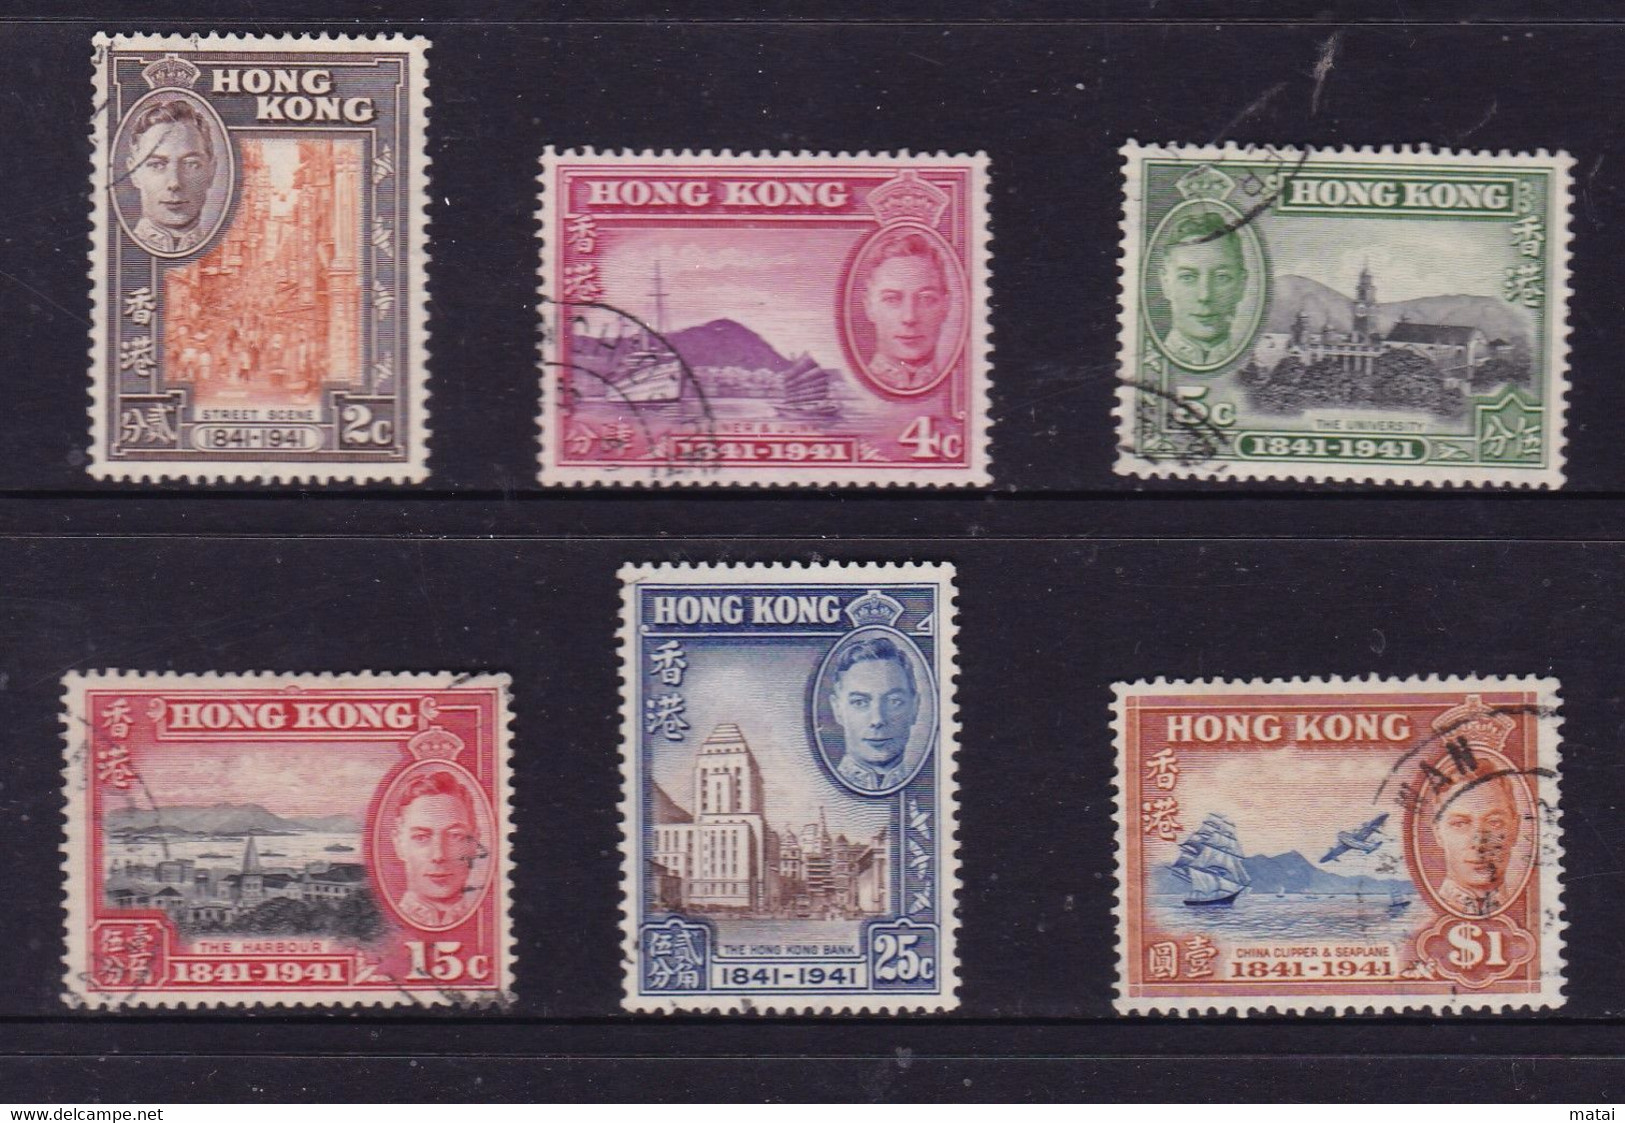 HONG KONG 1941, "Centenary Of British Occupation", Serie Cancelled, Very Light Trace Of Hinge - 1941-45 Occupazione Giapponese